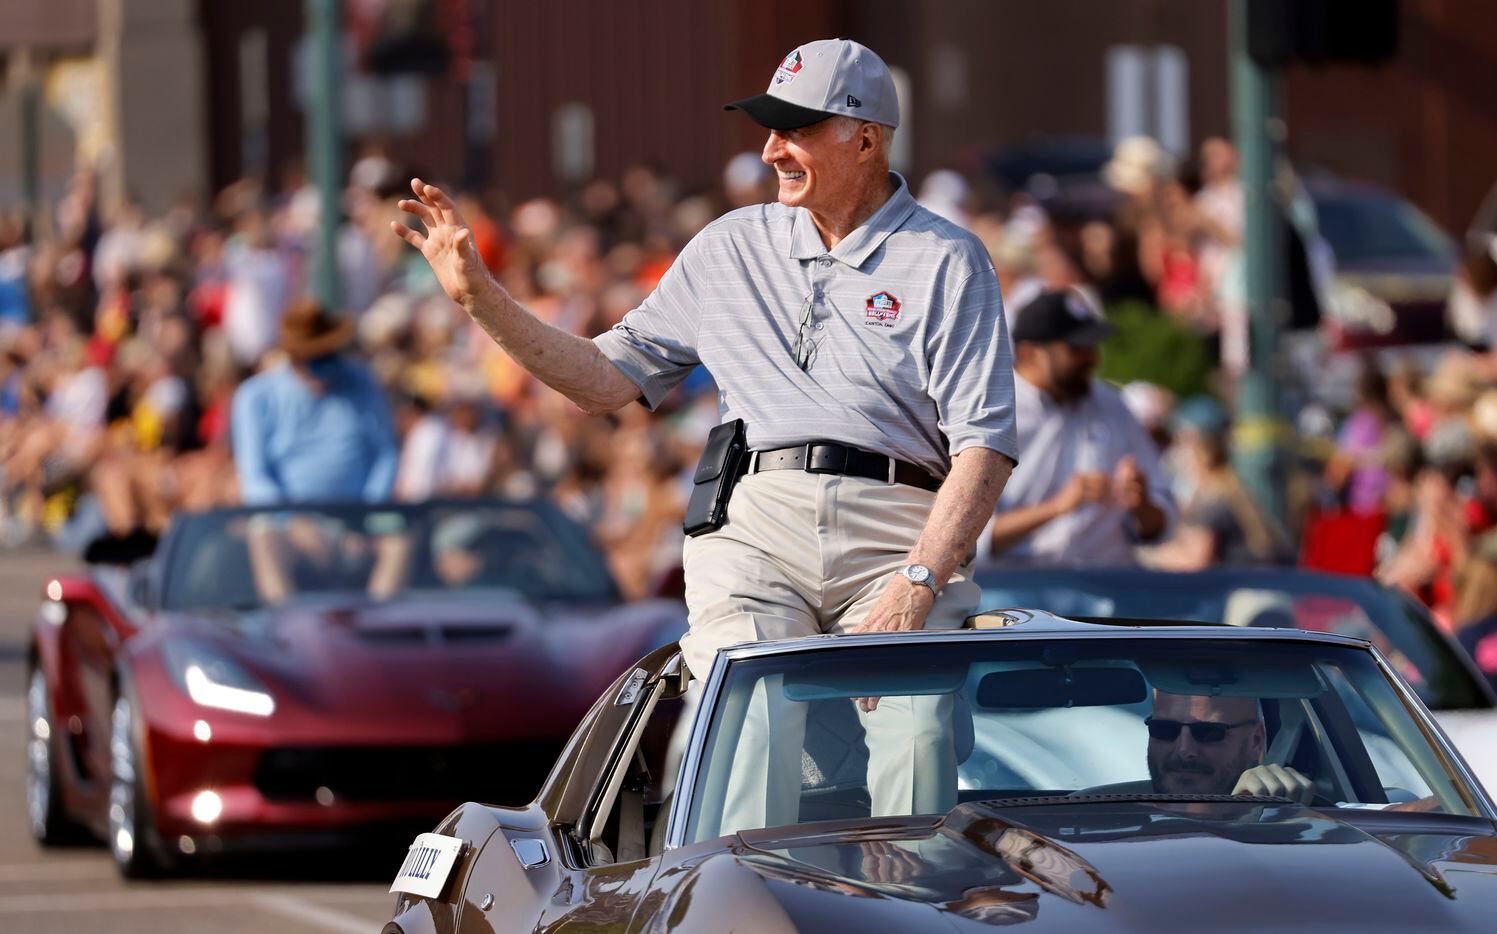 Dallas Cowboys Pro Football Hall of Fame member Bob Lilly waves to fans during the Canton Repository Grand Parade in downtown Canton, Ohio, Saturday, August 7, 2021. The parade honored newly elected and former members of the Hall, including newcomers and former Dallas Cowboys players Cliff Harris, Drew Pearson and head coach Jimmy Johnson. (Tom Fox/The Dallas Morning News)